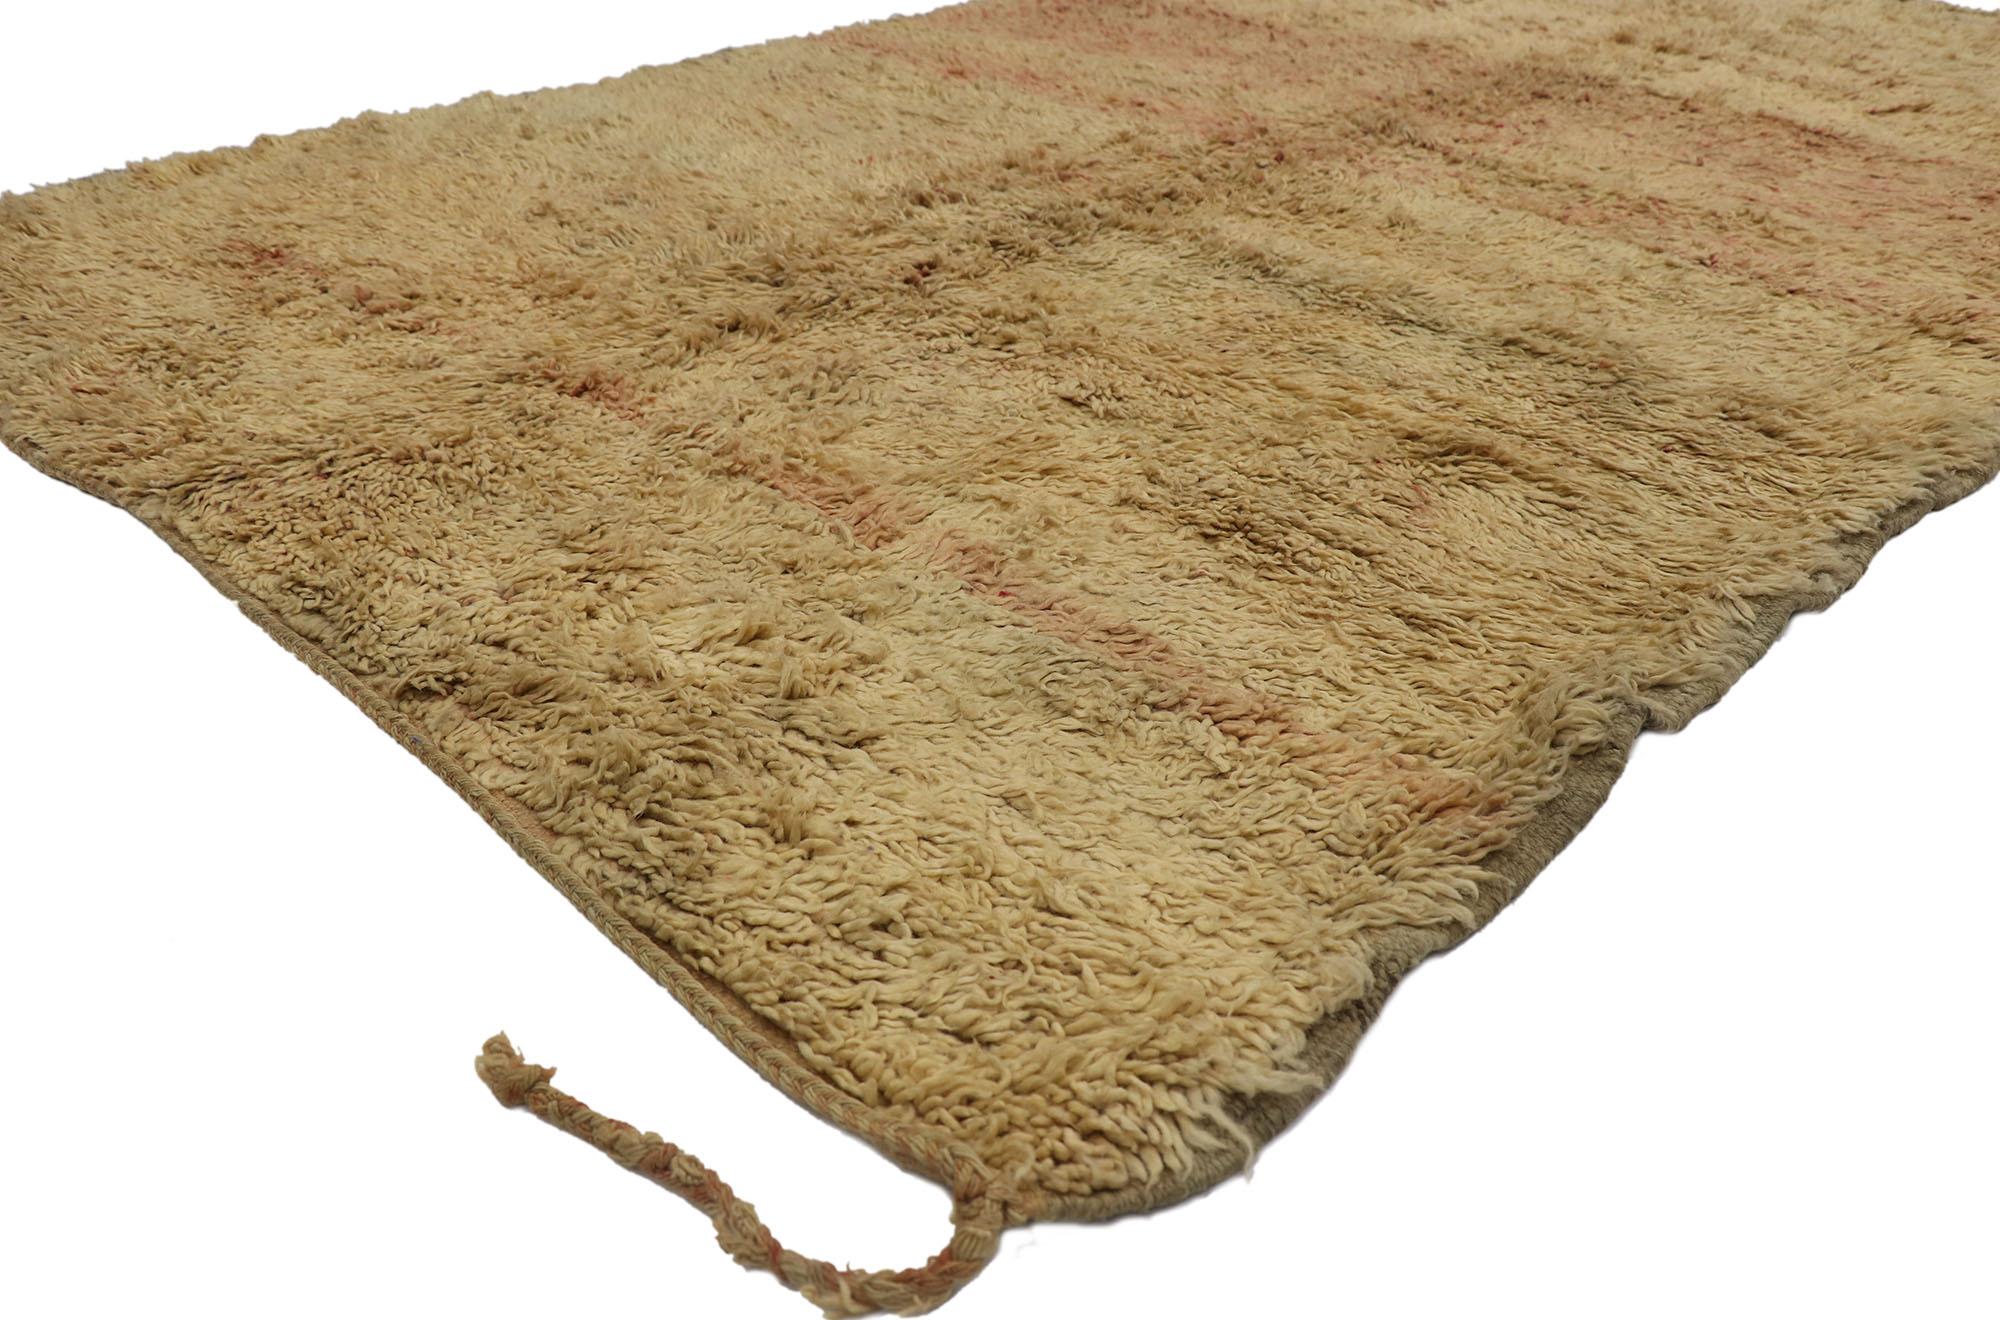 21477 Vintage Berber Beni Mrirt Moroccan rug with Organic Modern Style 06'04 x 10'04. With its simplicity, plush pile and rustic sensibility, this hand knotted wool vintage Berber Beni Mrirt Moroccan rug is a captivating vision of woven beauty.